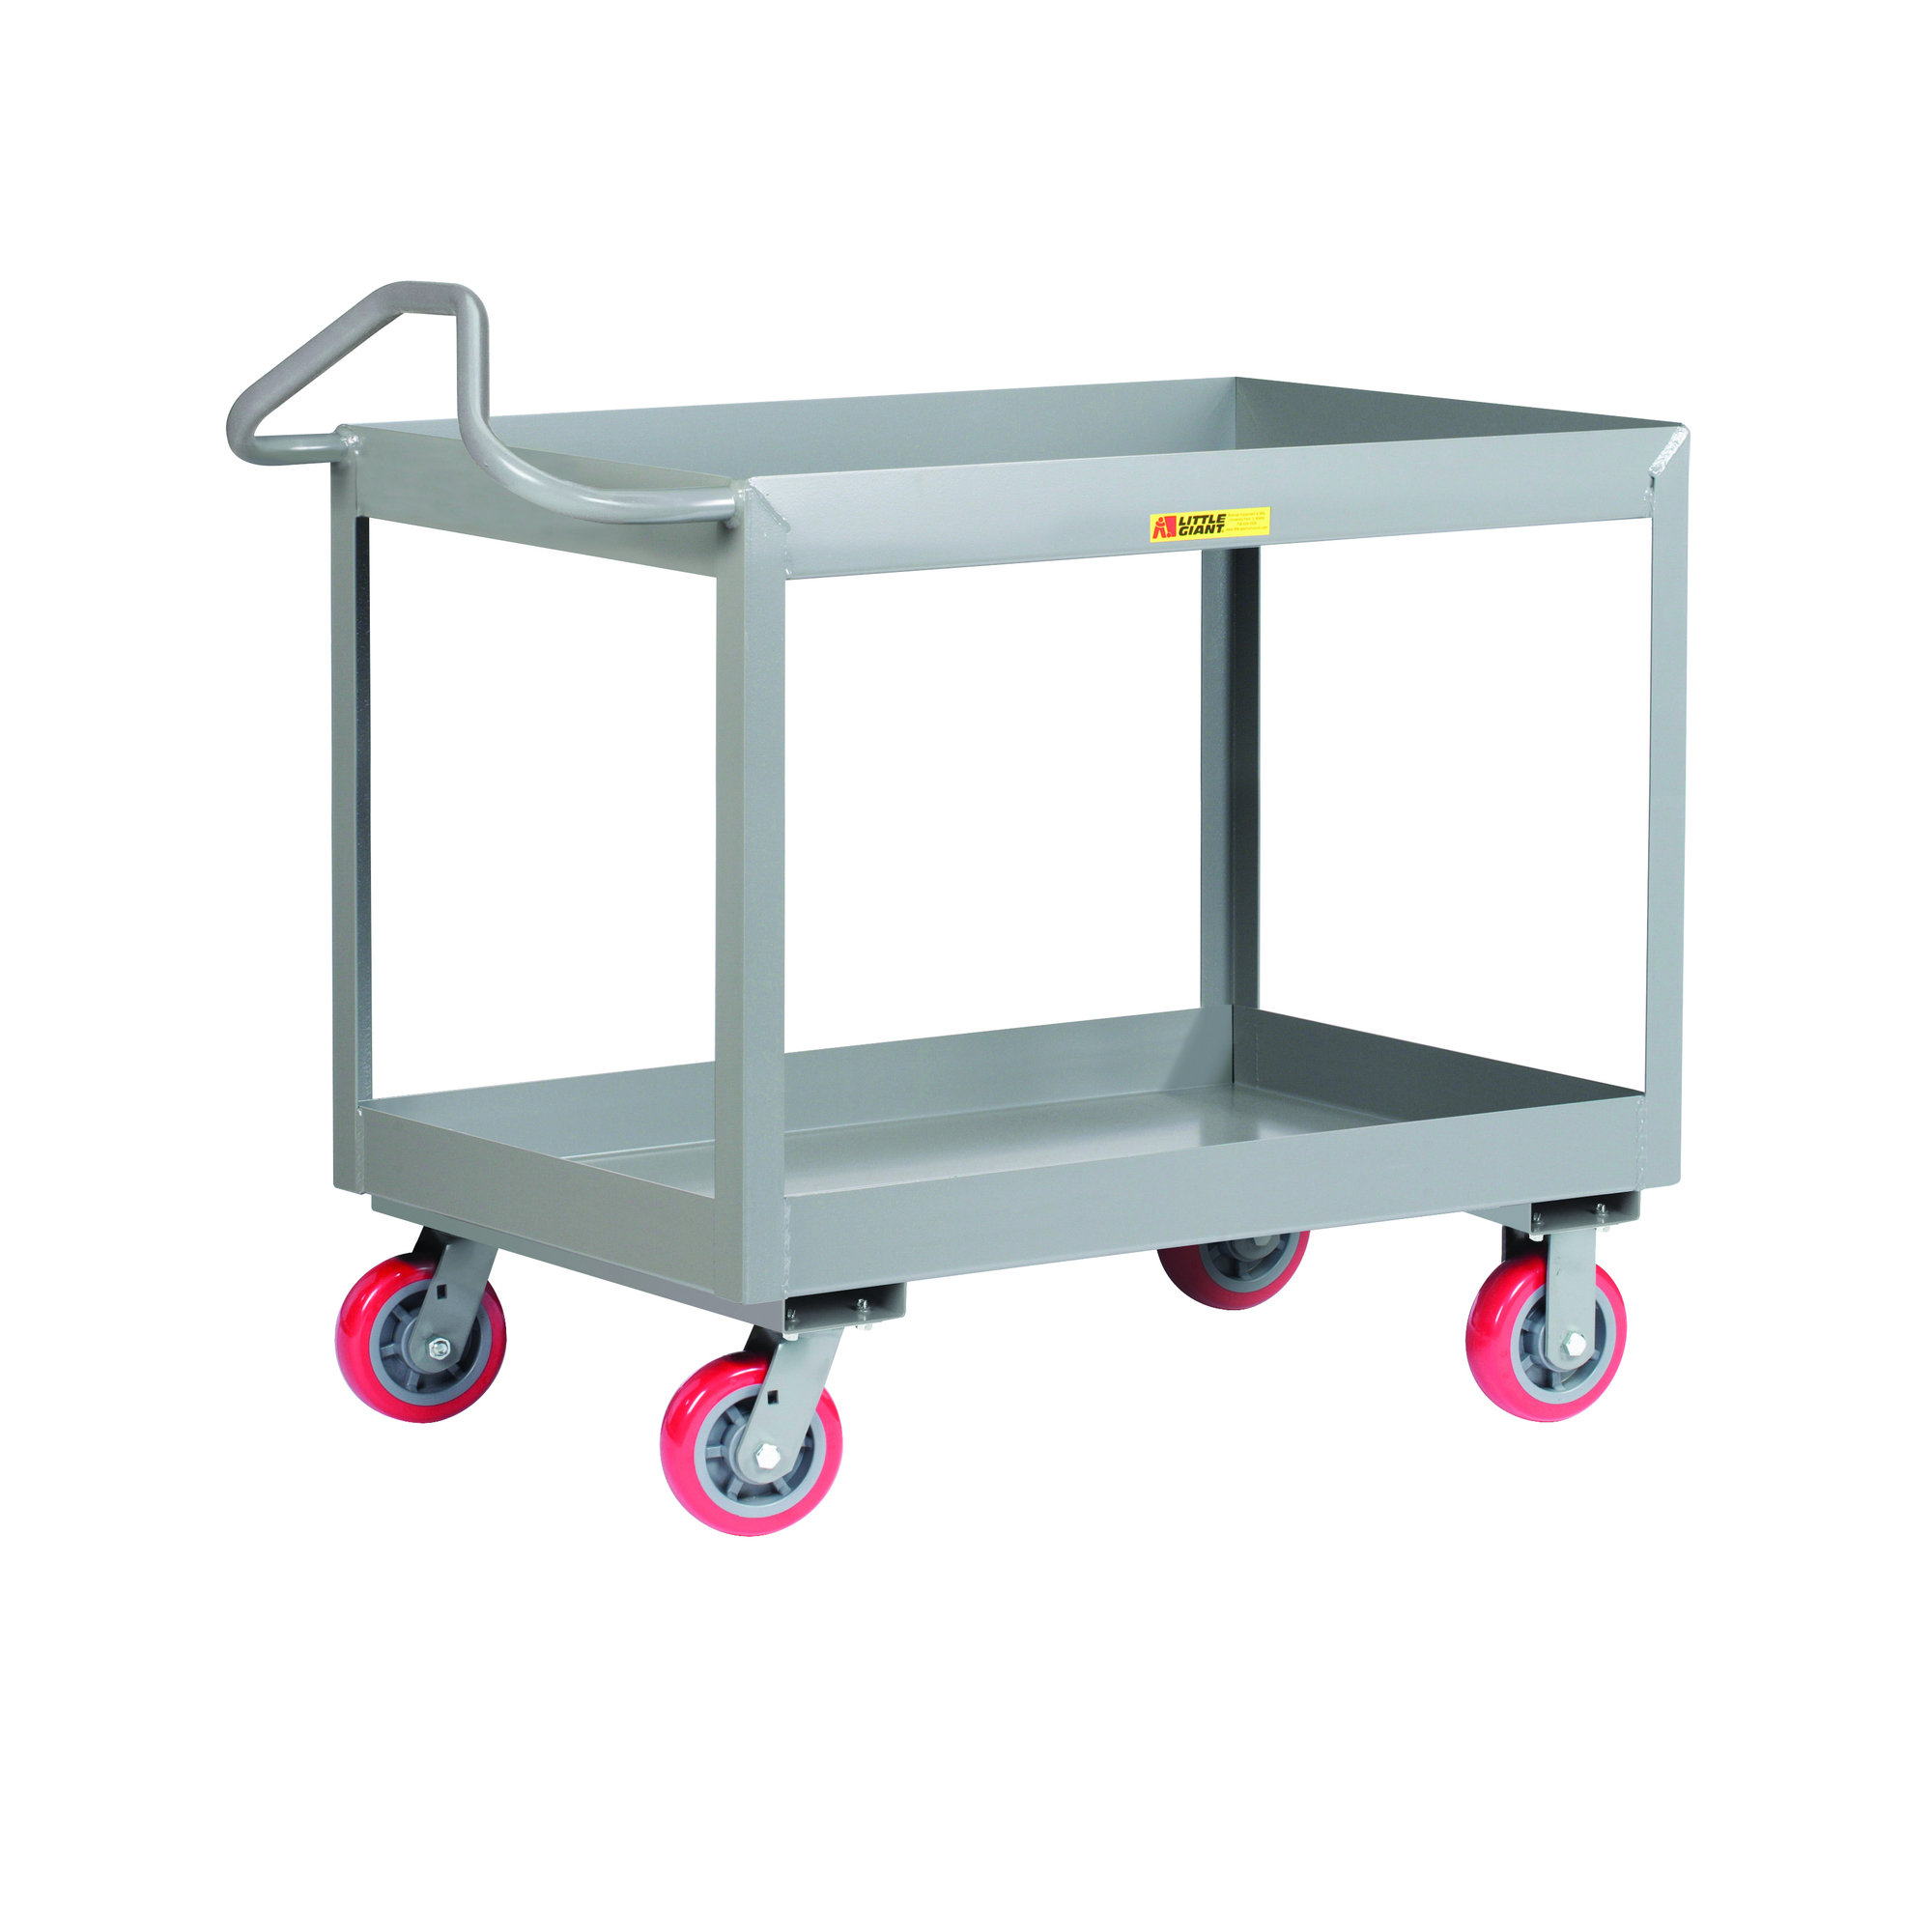 Little Giant, 3Inch Deep Shelf Truck, Ergo Handle, 24x48, 3600 lbs, Total Capacity 3600 lb, Shelves (qty.) 2, Material Carbon Steel, Model ENDS-2448X3